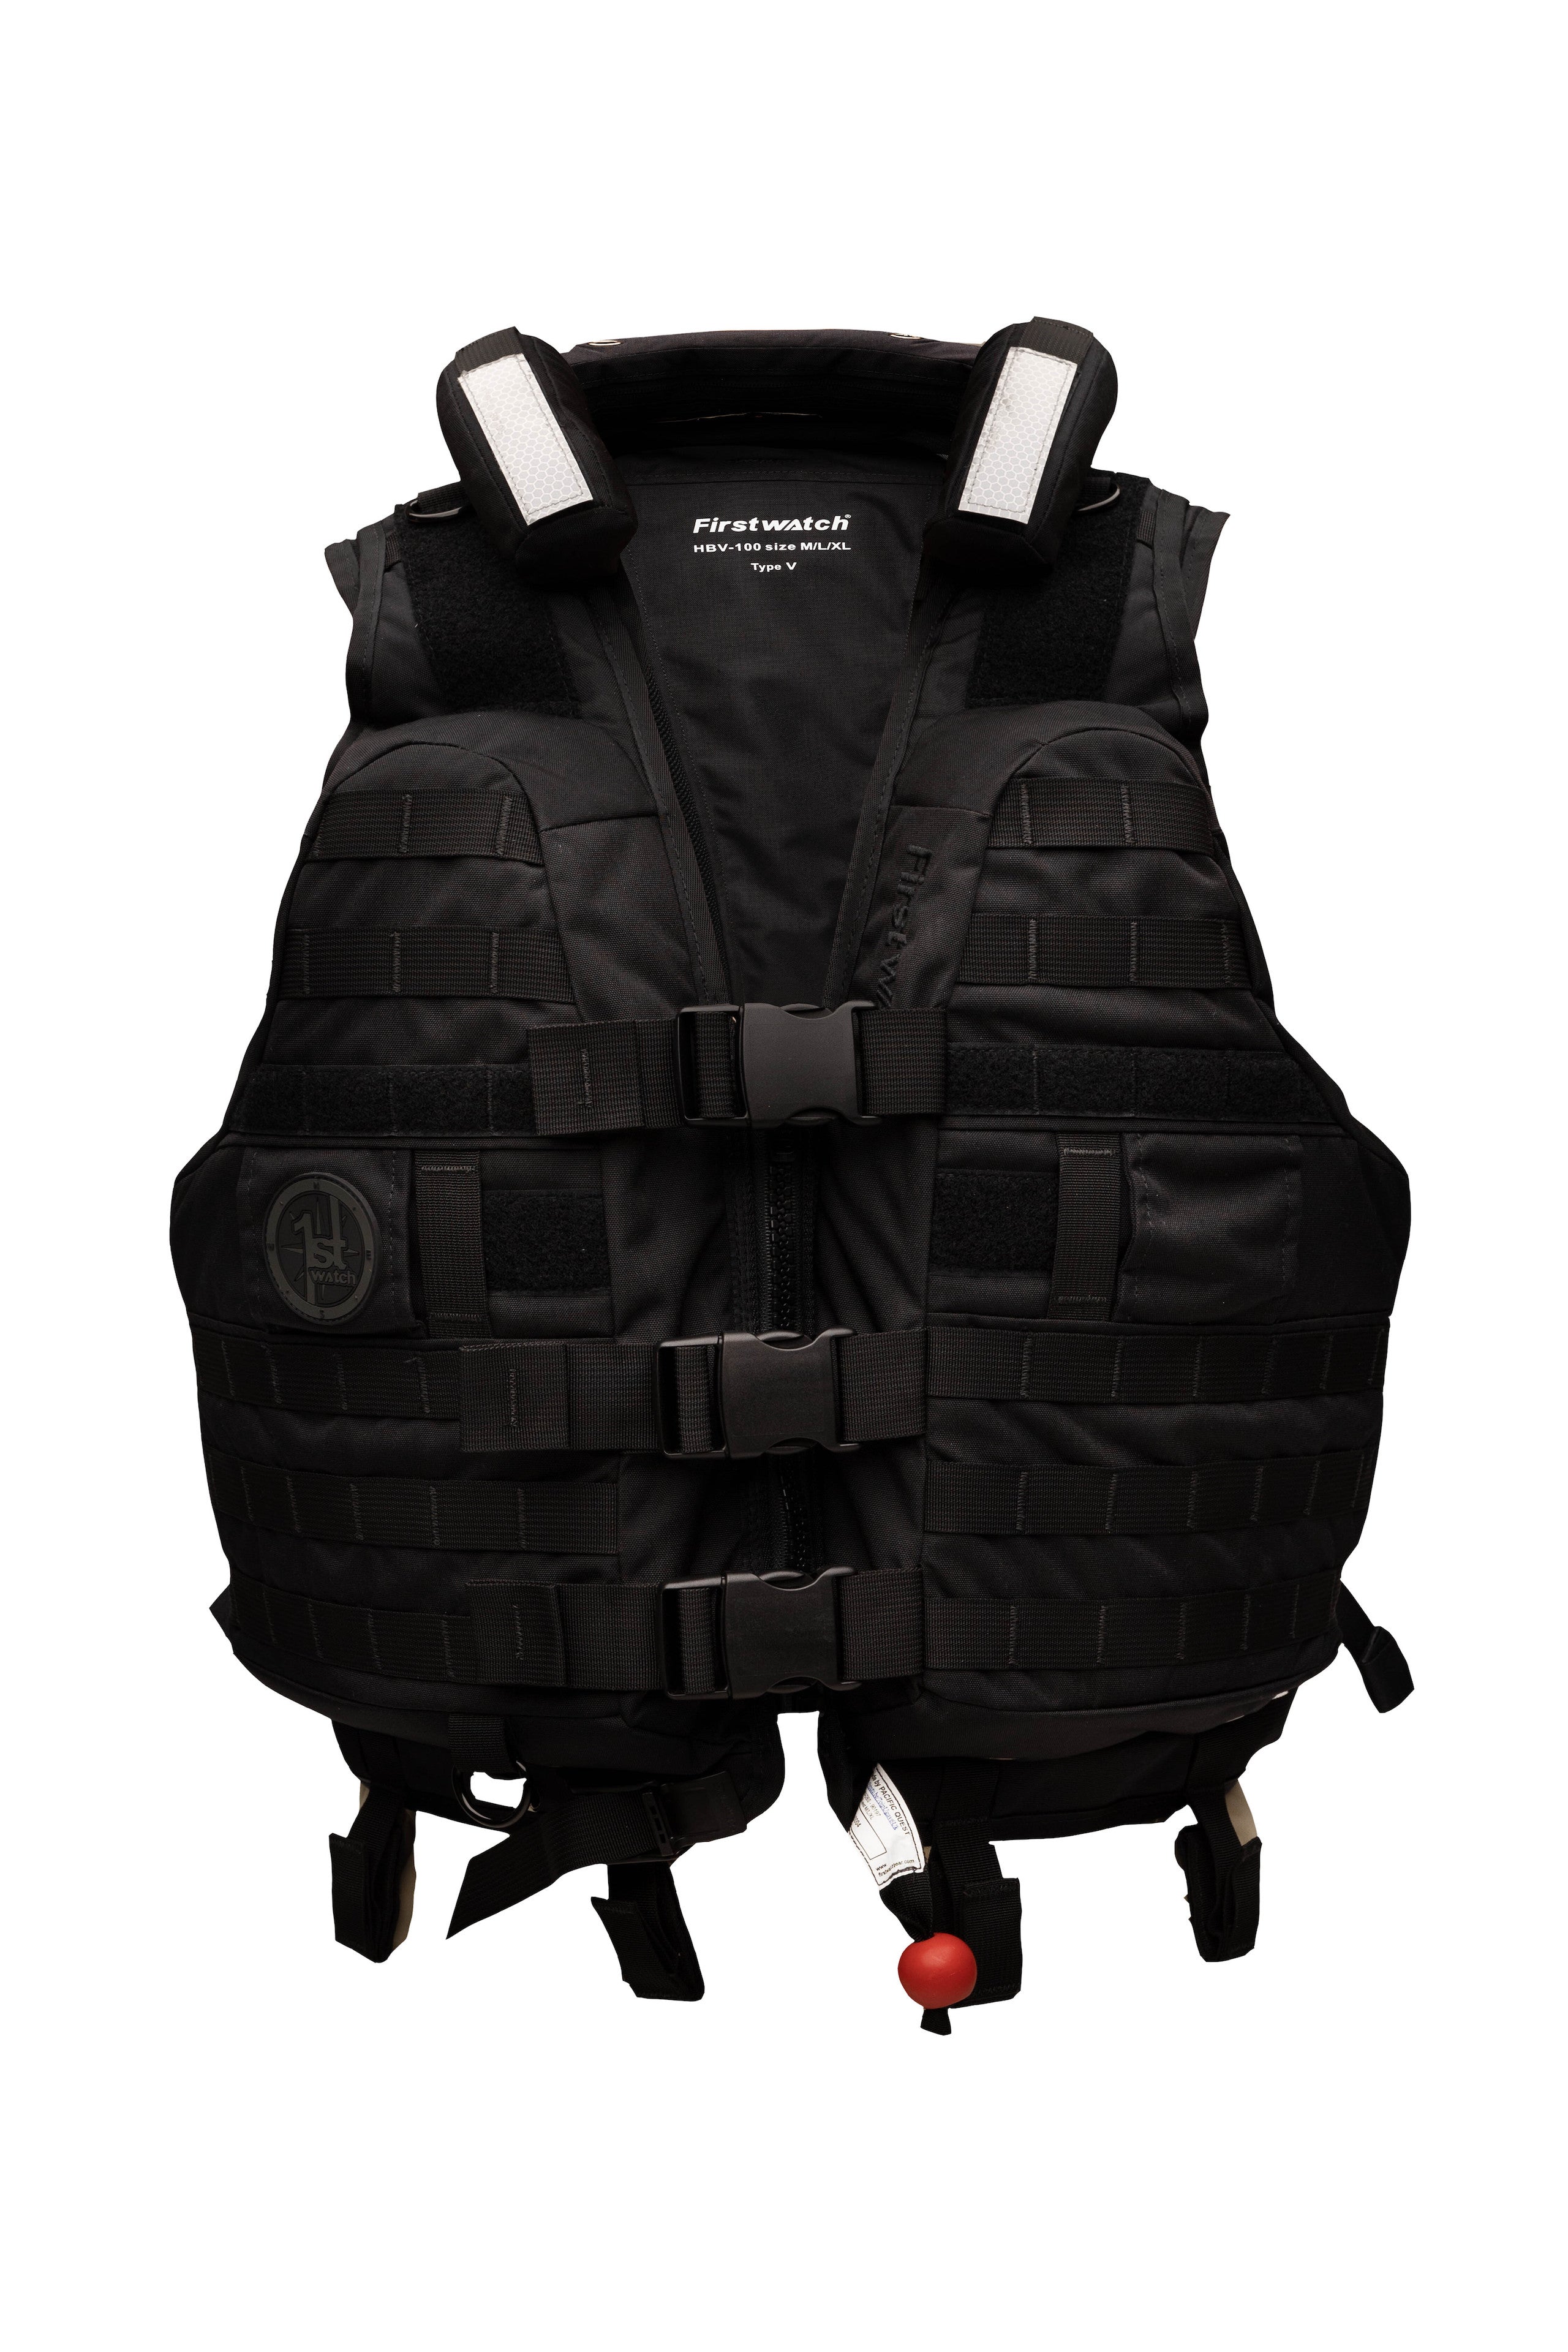 The Roughneck Tactical High Buoyancy Vest